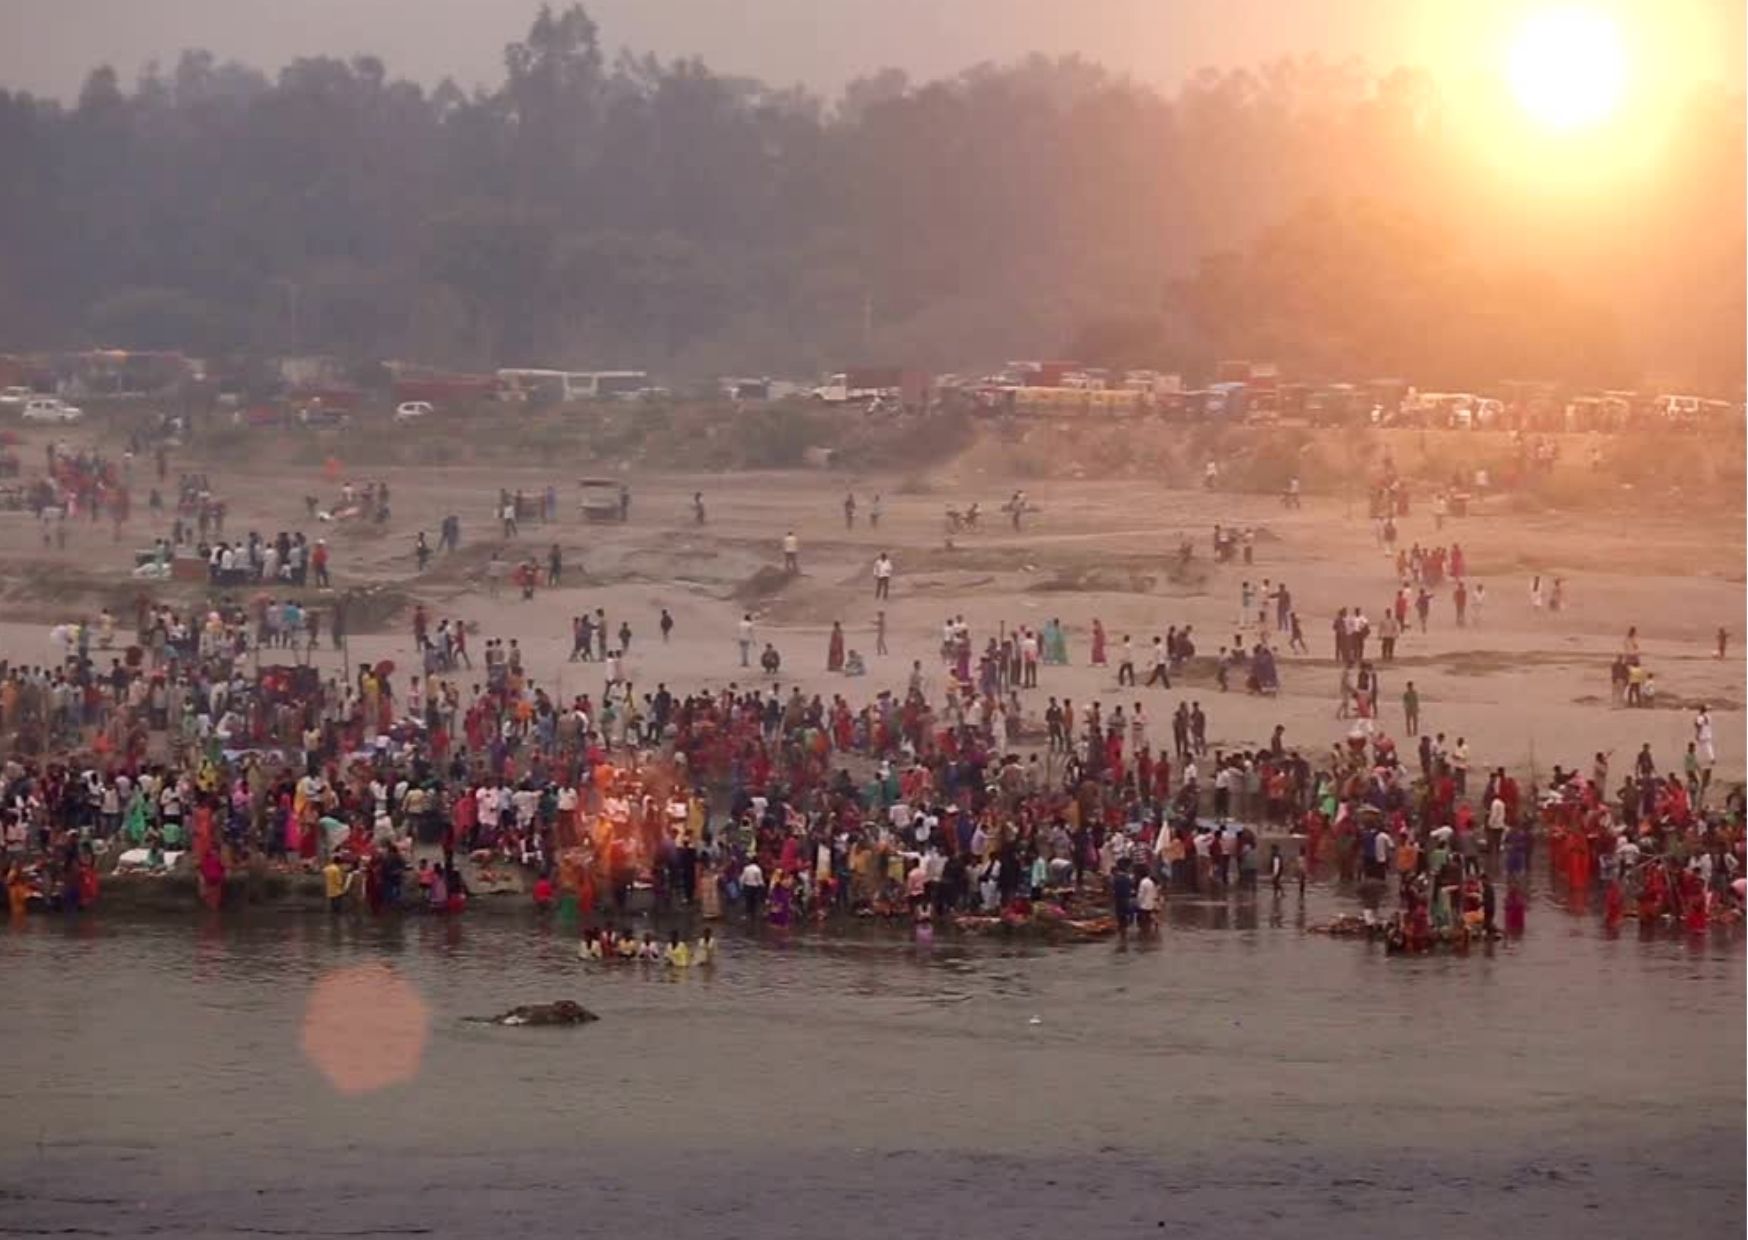 hundreds of people on a beach worshipping Sun God for Chhath Puja at sunset